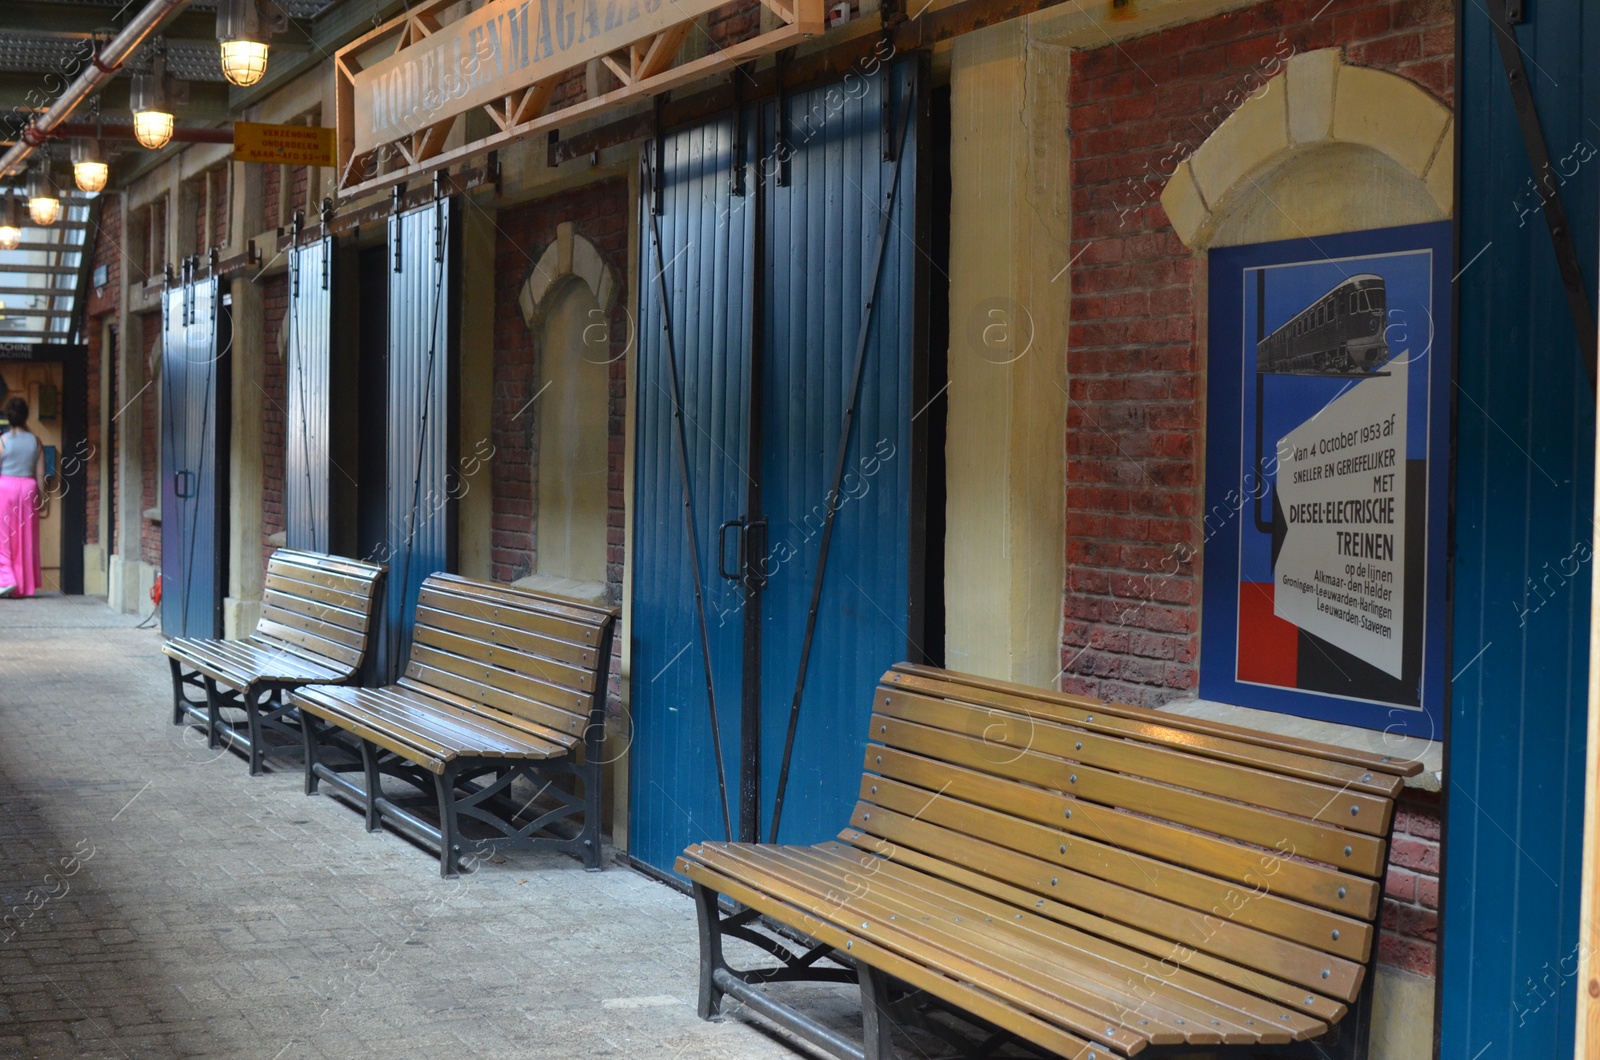 Photo of Utrecht, Netherlands - July 23, 2022: Spoorwegmuseum. Location with wooden benches at railway station